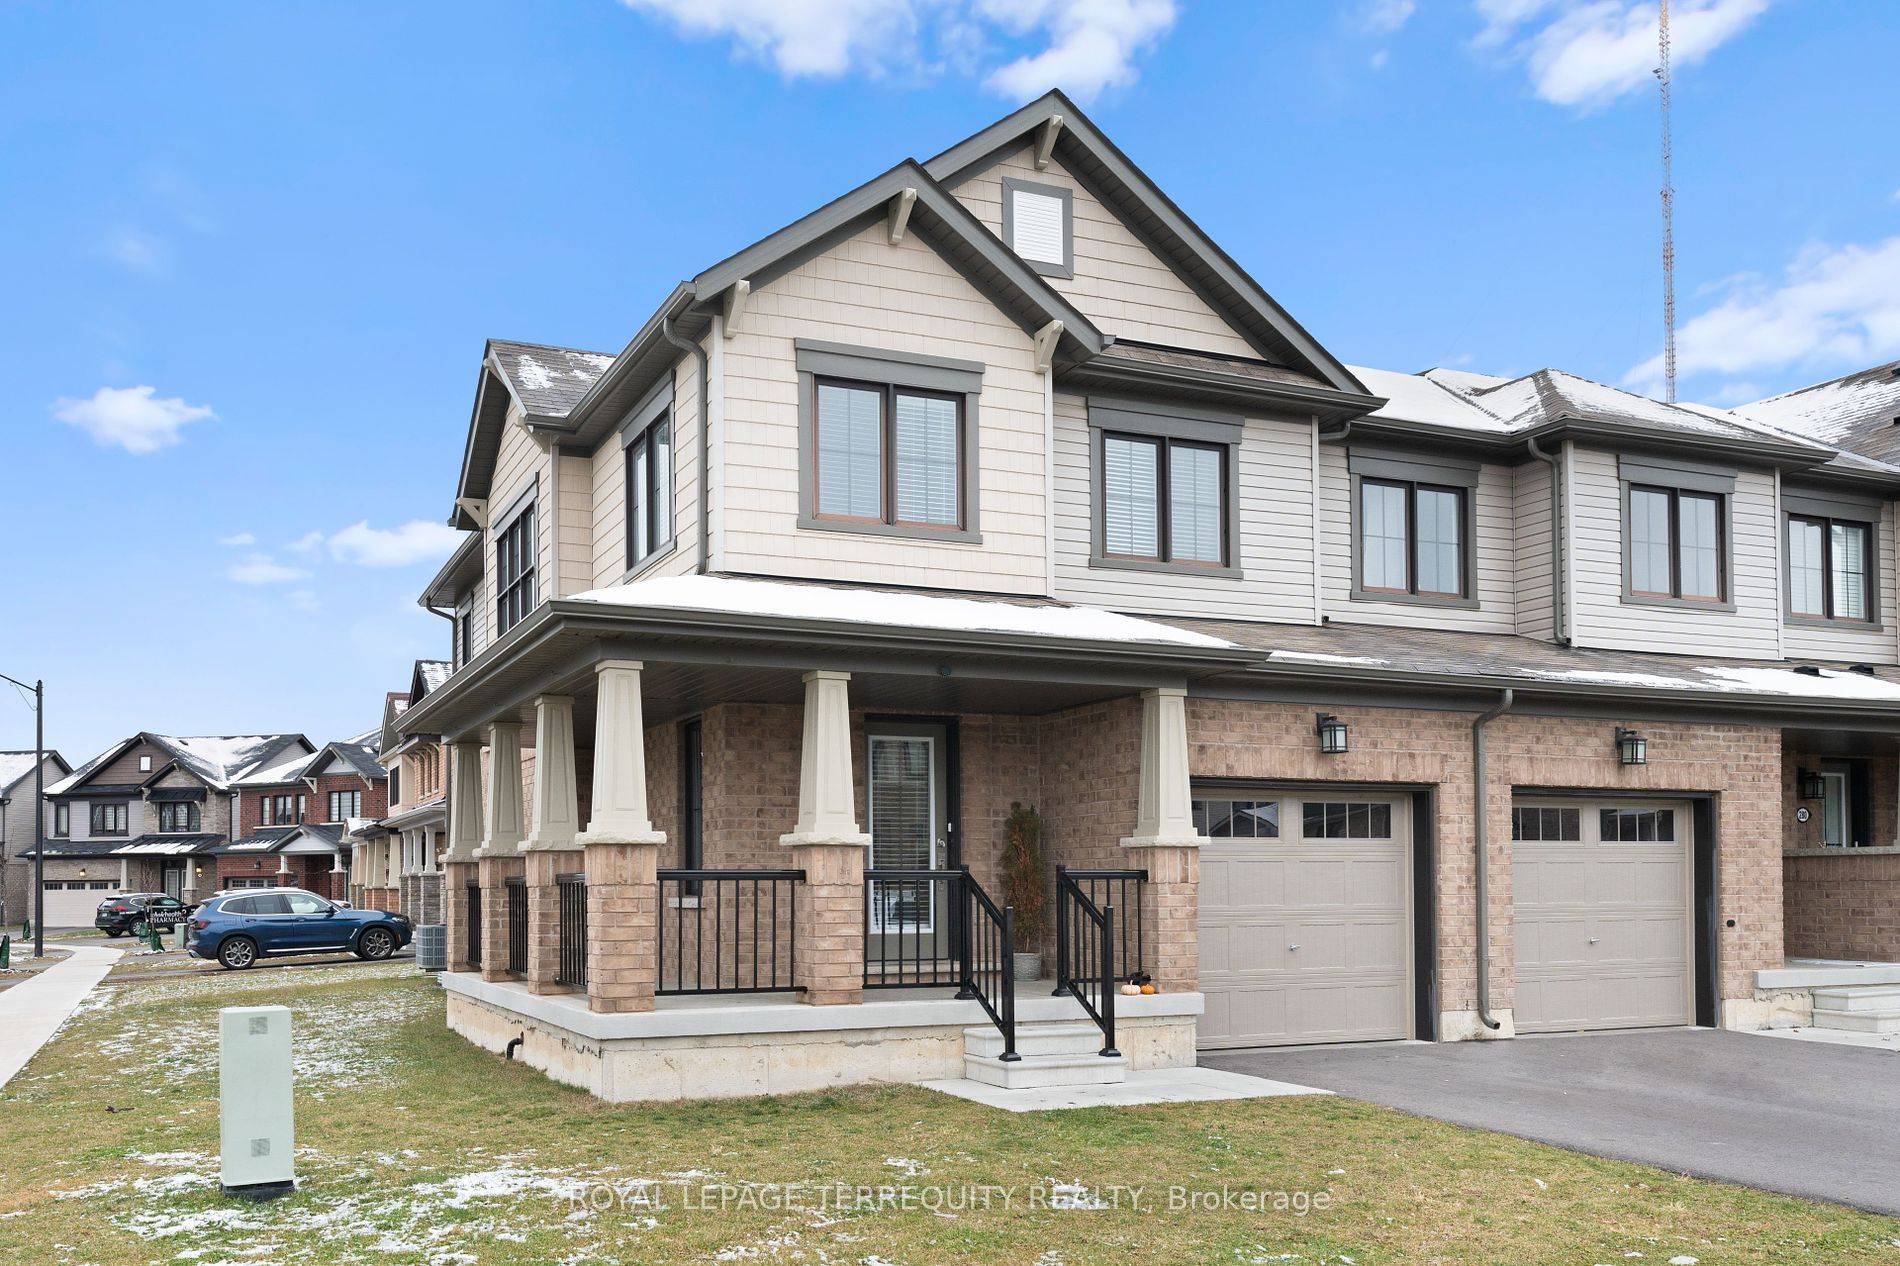 This Gorgeous Freehold End Unit Is Nestled In The Heart Of The Sought After Stoney Creek Area In Hamilton.